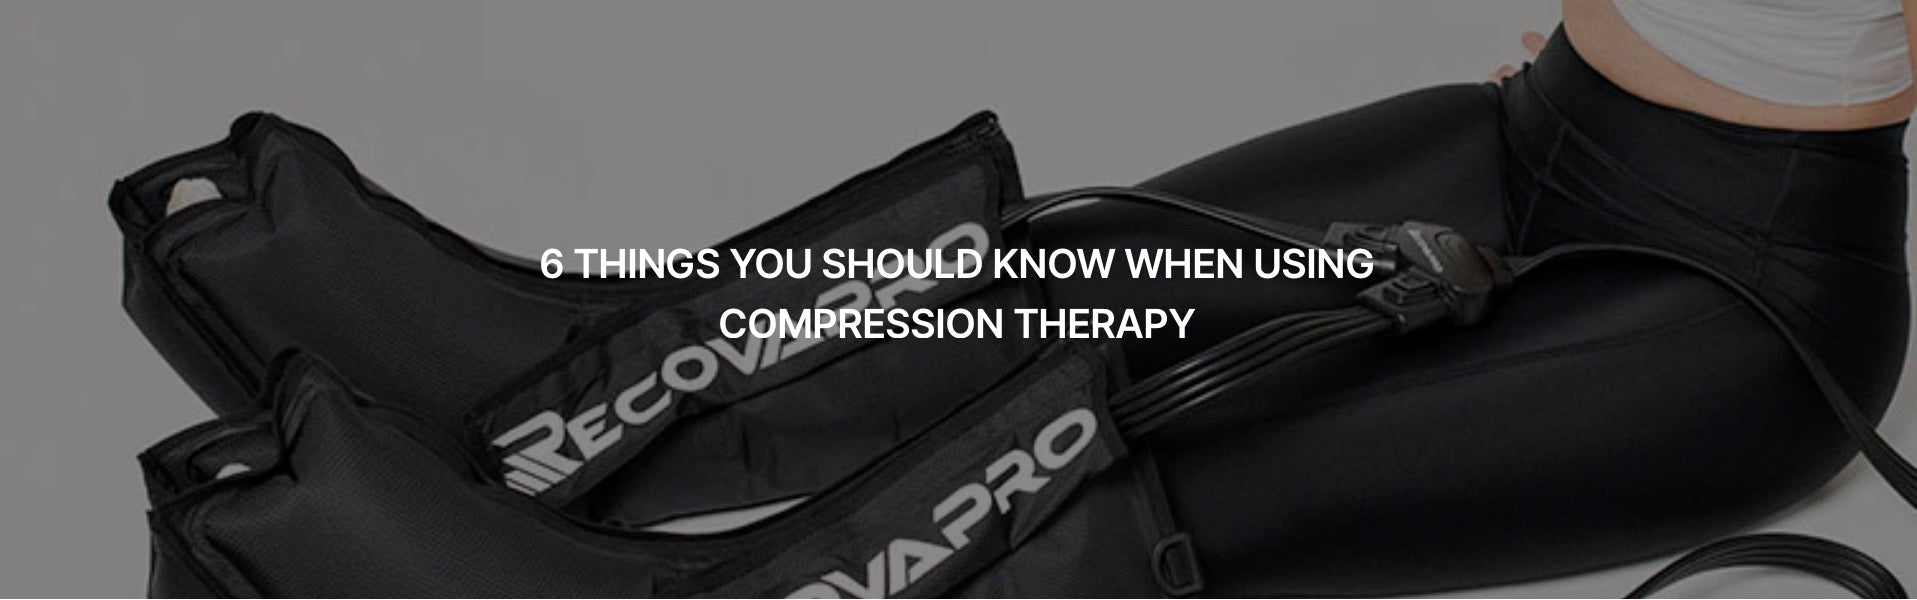 6 THINGS YOU SHOULD KNOW WHEN USING COMPRESSION THERAPY